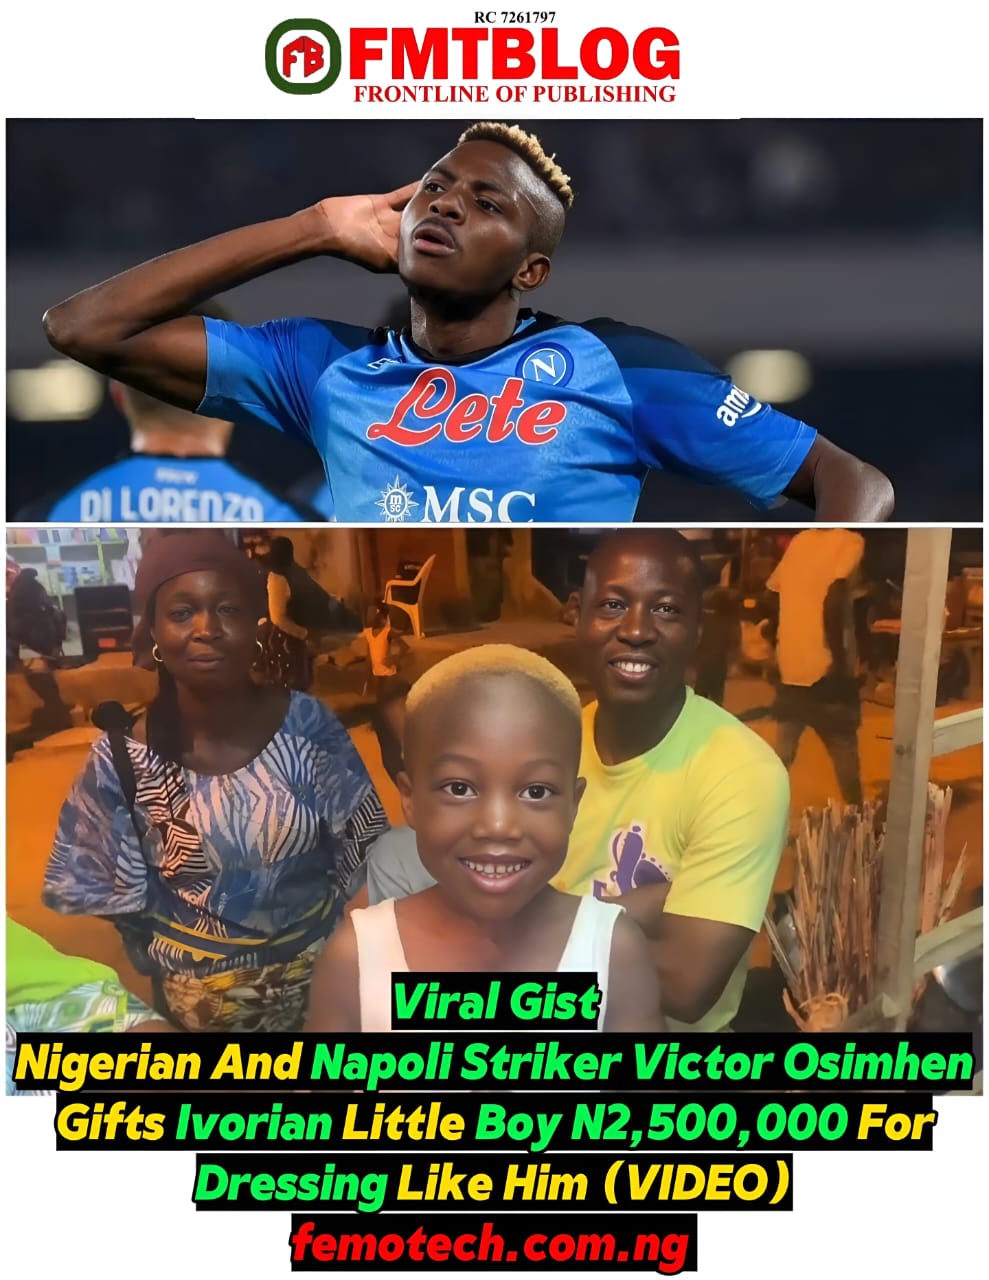 Nigerian and Napoli Striker Victor Osimhen Gifts Ivorian Little Boy N2,500,000 For Dressing Like Him (VIDEO)